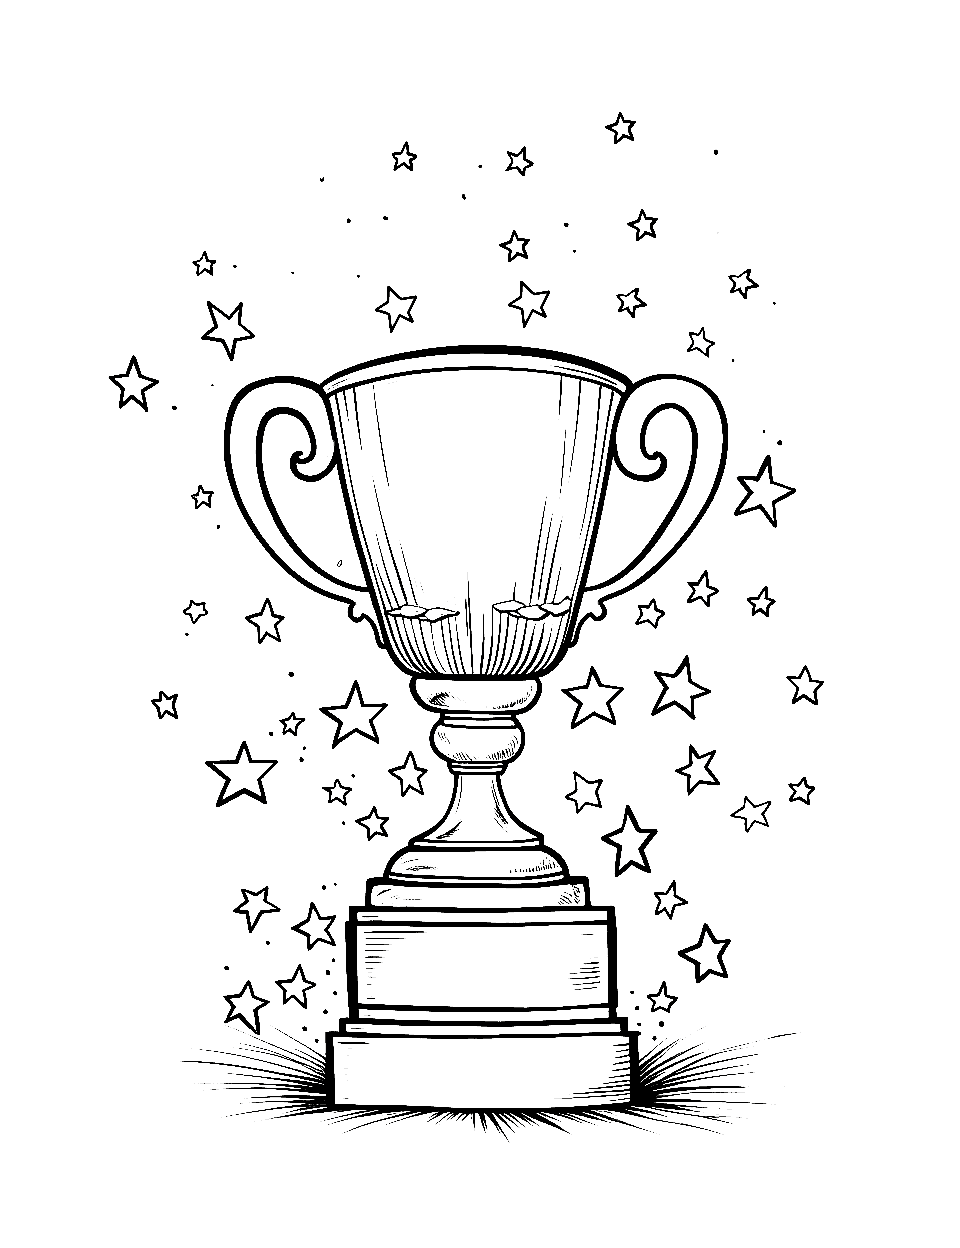 Winning Super Bowl Trophy Coloring Page - The Super Bowl trophy with star-shaped confetti falling around it.